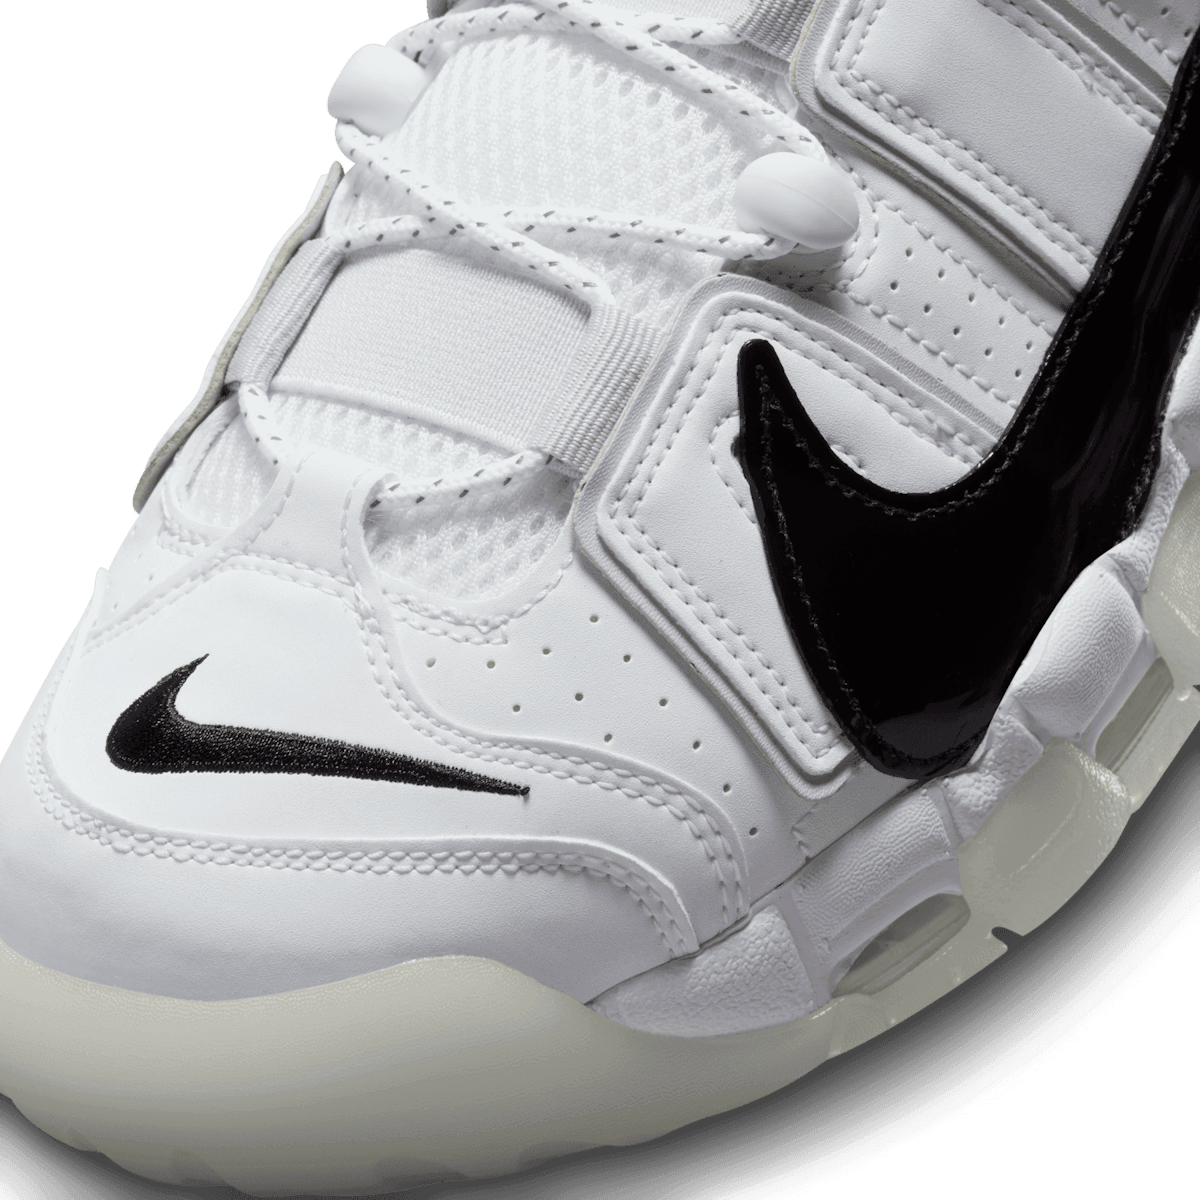 Nike Air More Uptempo Copy Paste White - DQ5014-100 Raffles and